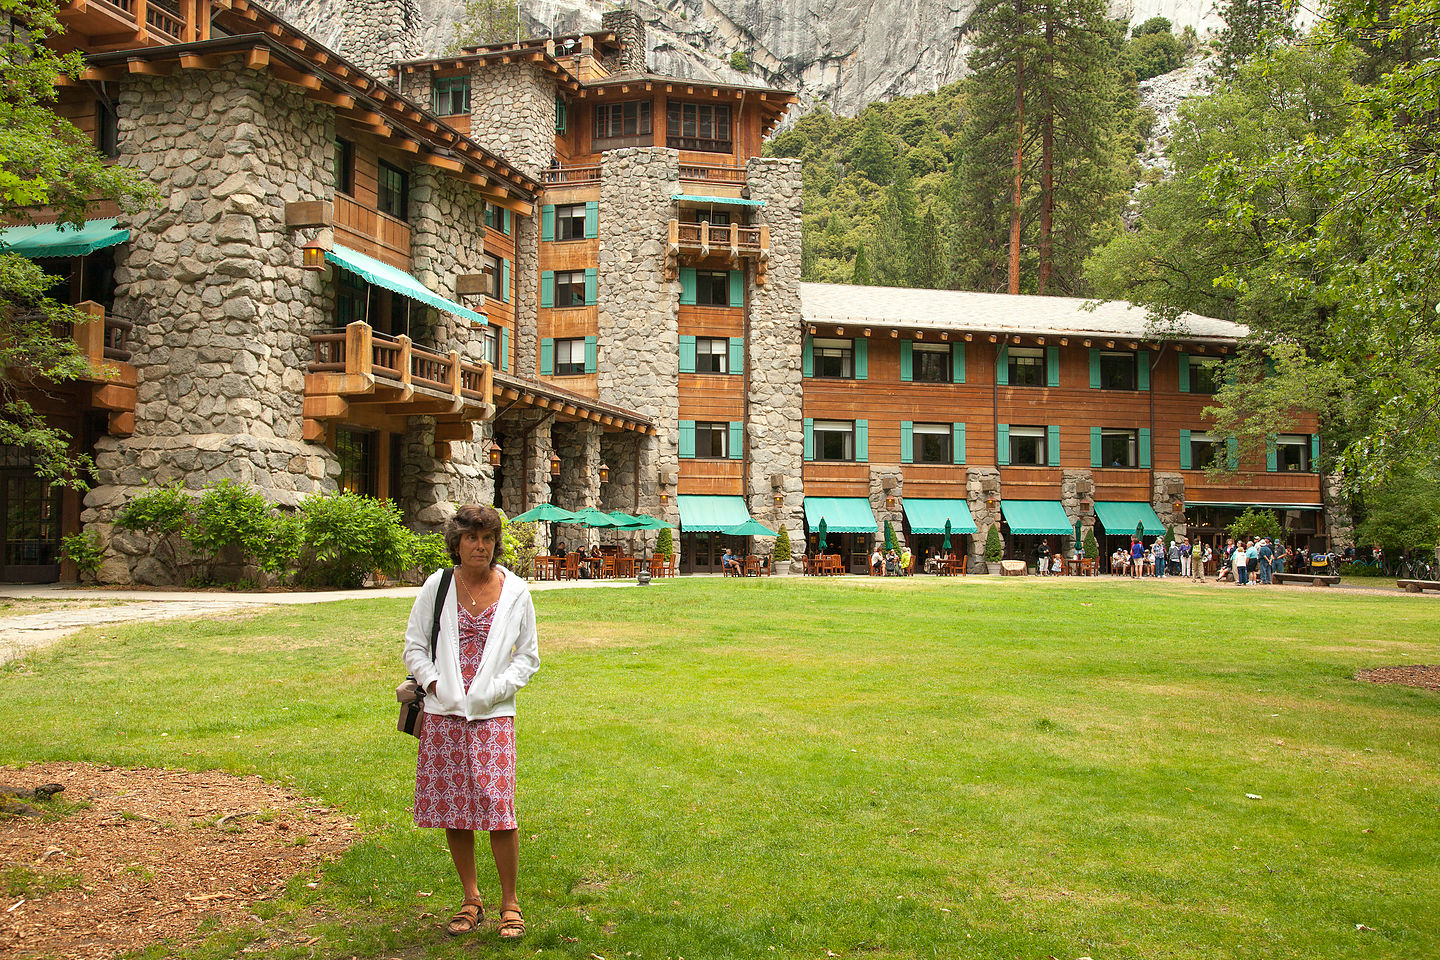 Lolo post lunch at the Ahwahnee